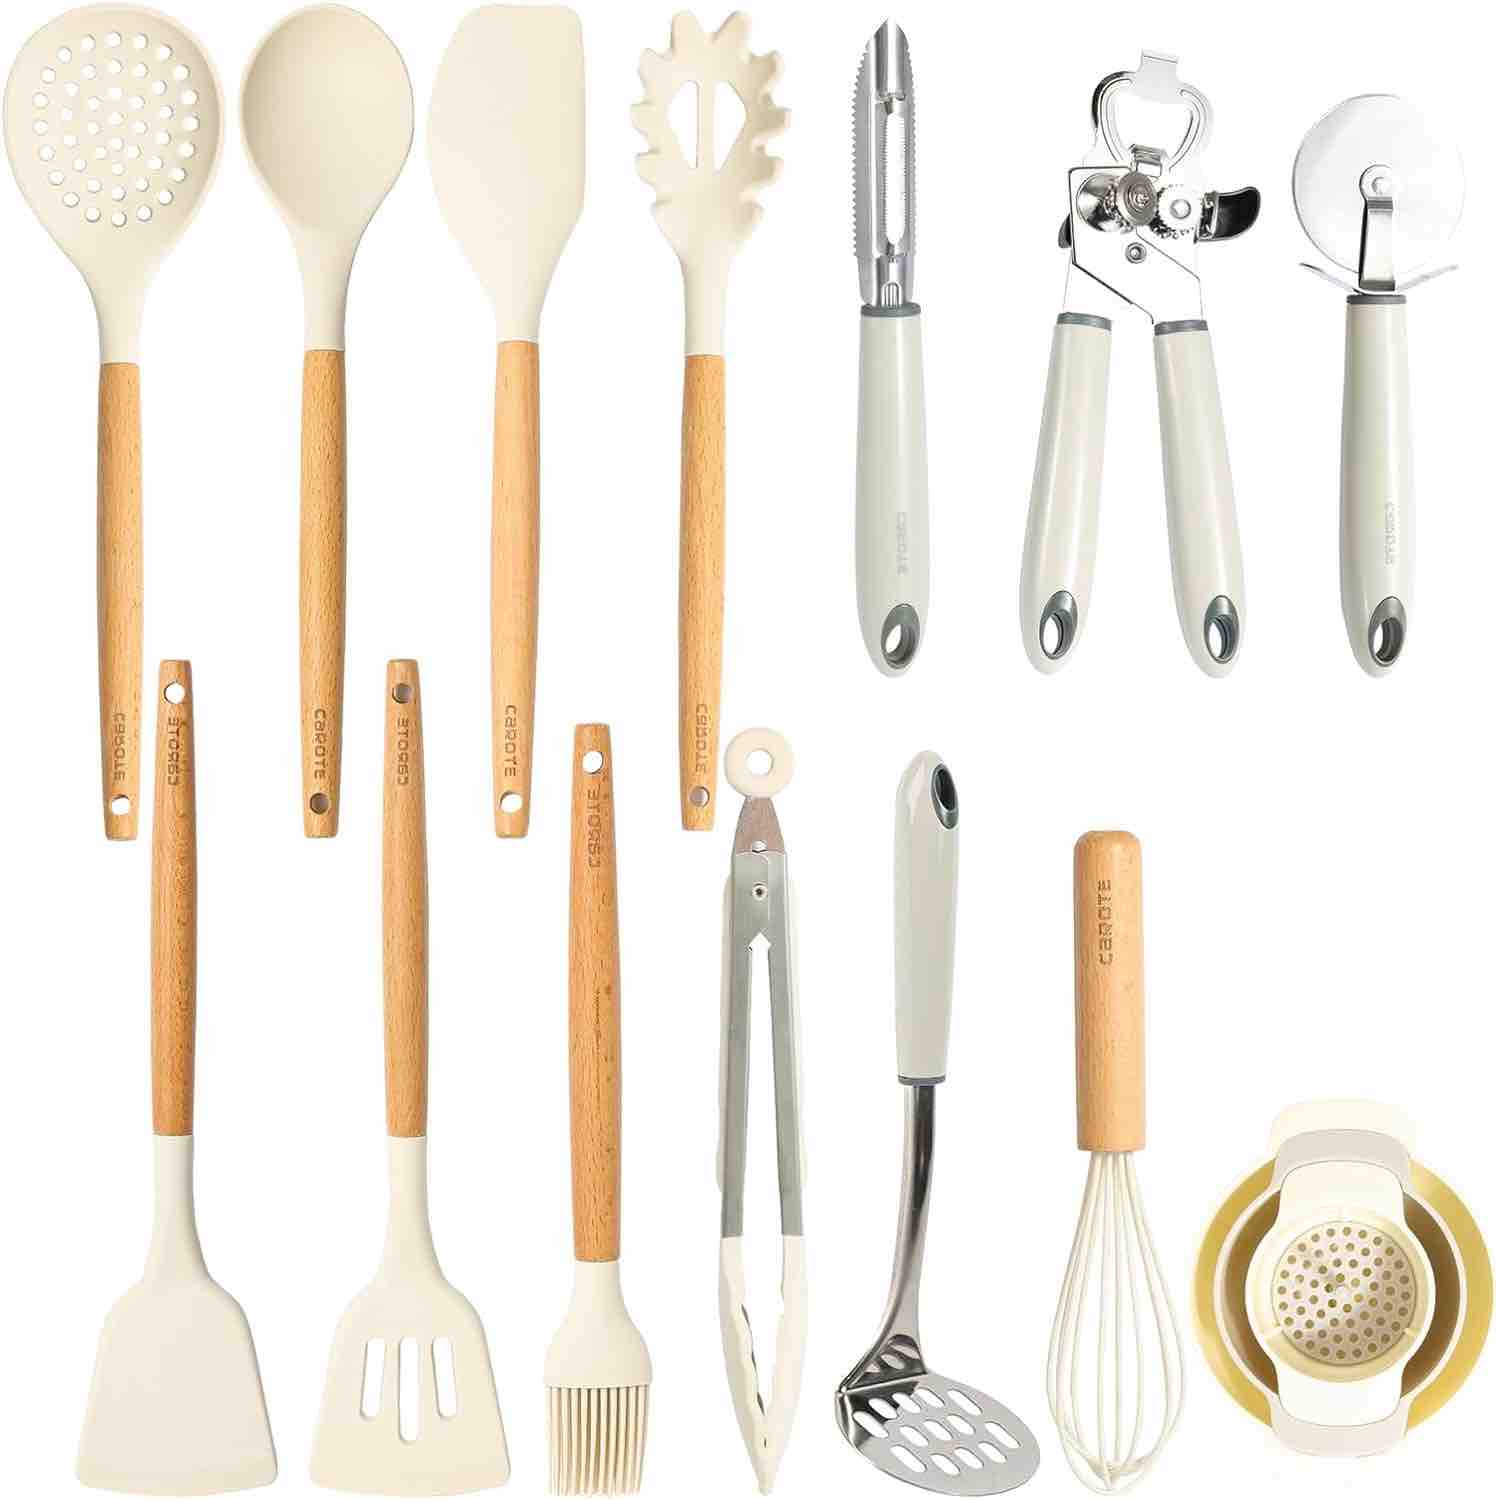 CAROTE Kitchen Utensil Set, Silicone Cooking Utensils Set, Heat Resistance Cooking Tools Spatula Set with Wooden Handle, 16 Pieces